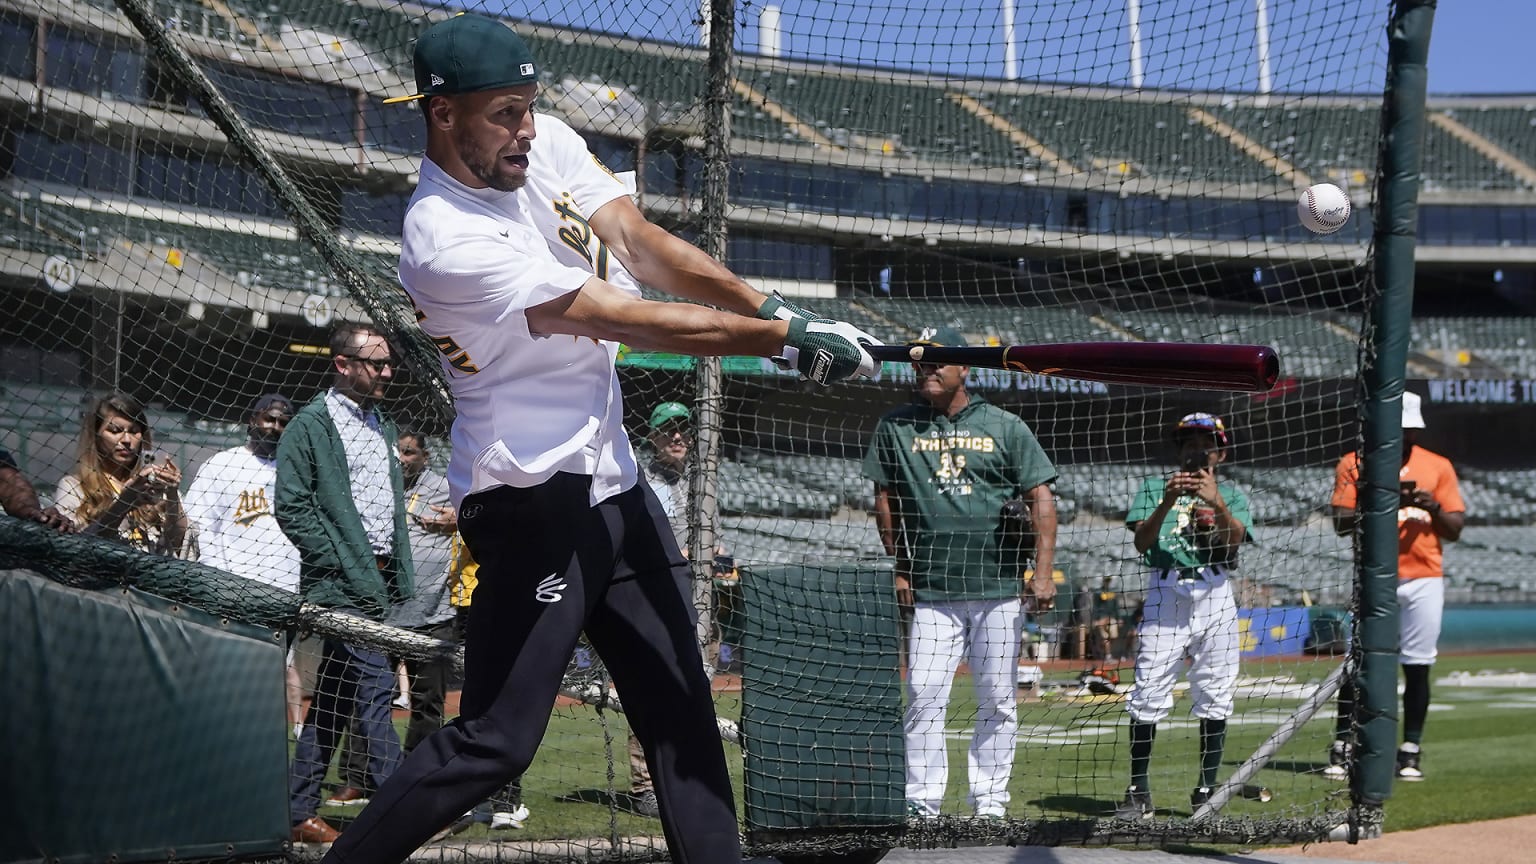 Steph Curry swings a bat in the batting cage wearing an A's jersey and cap